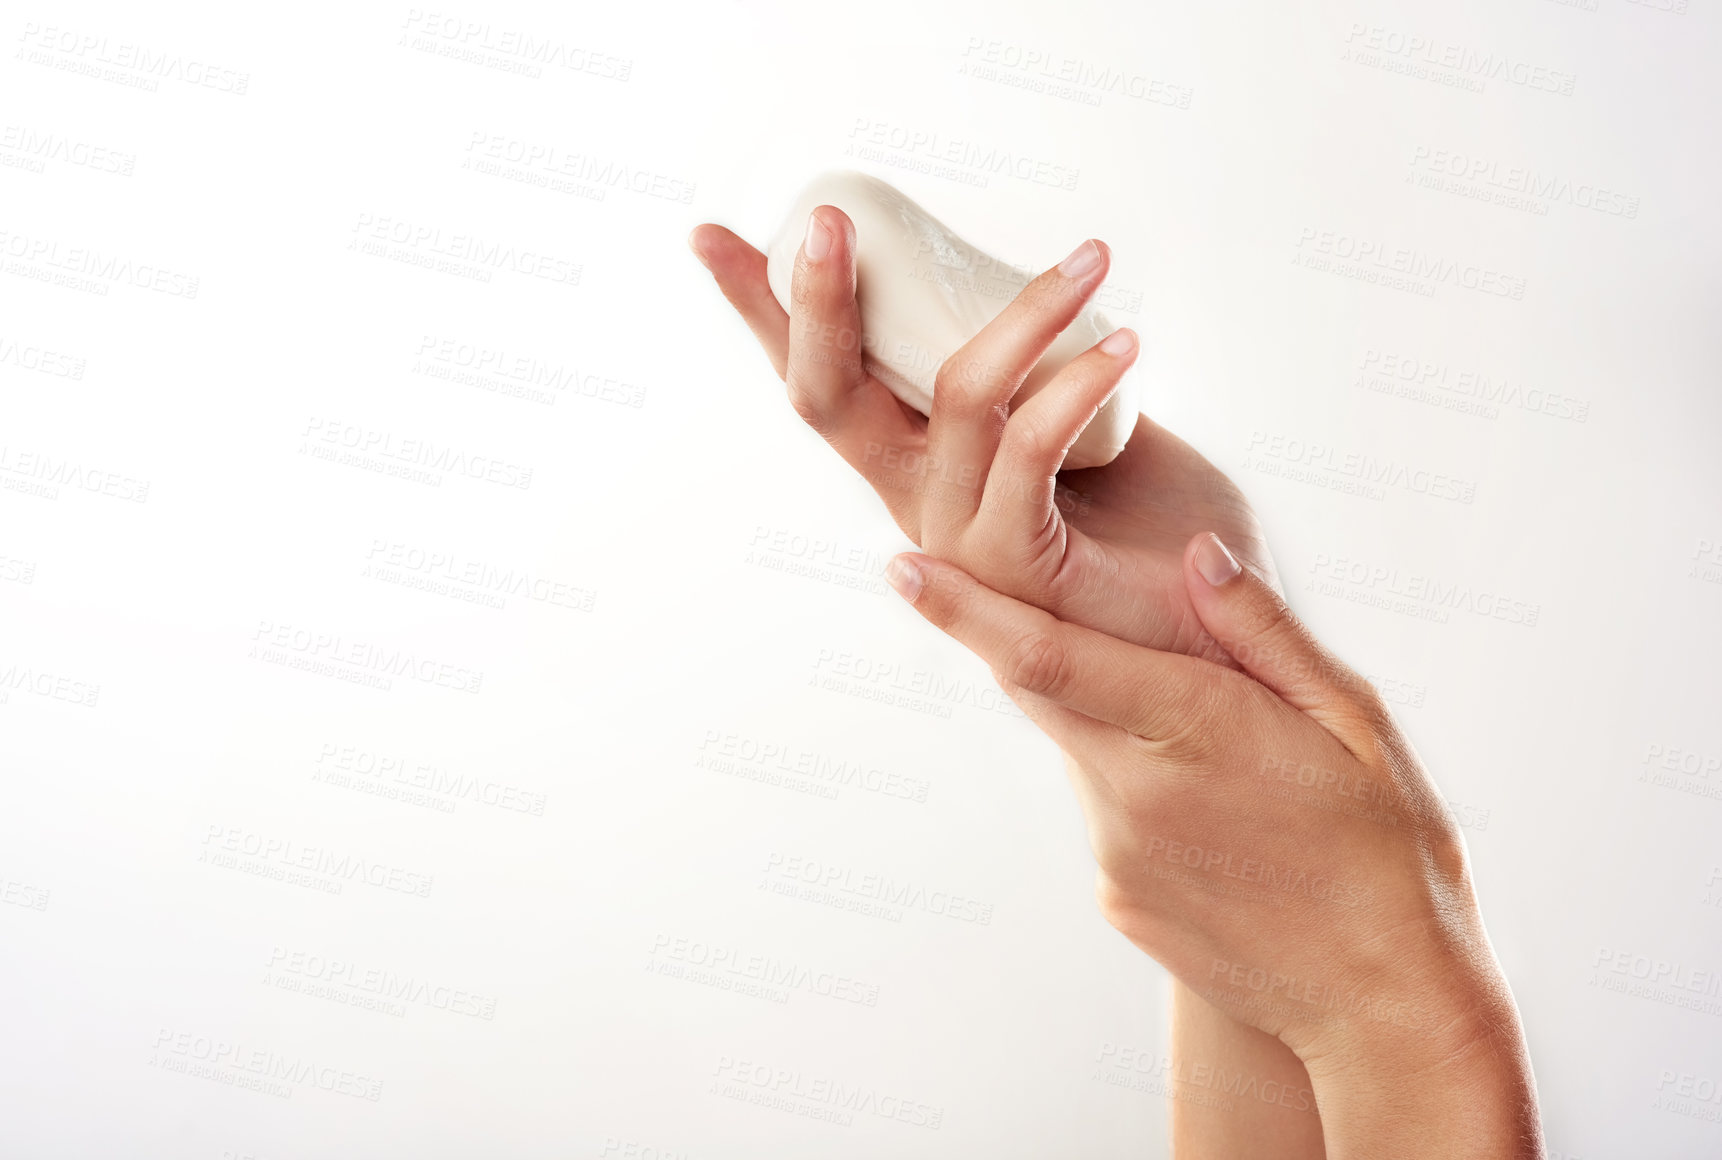 Buy stock photo Closeup studio shot of a woman's hands holding a bar of soap